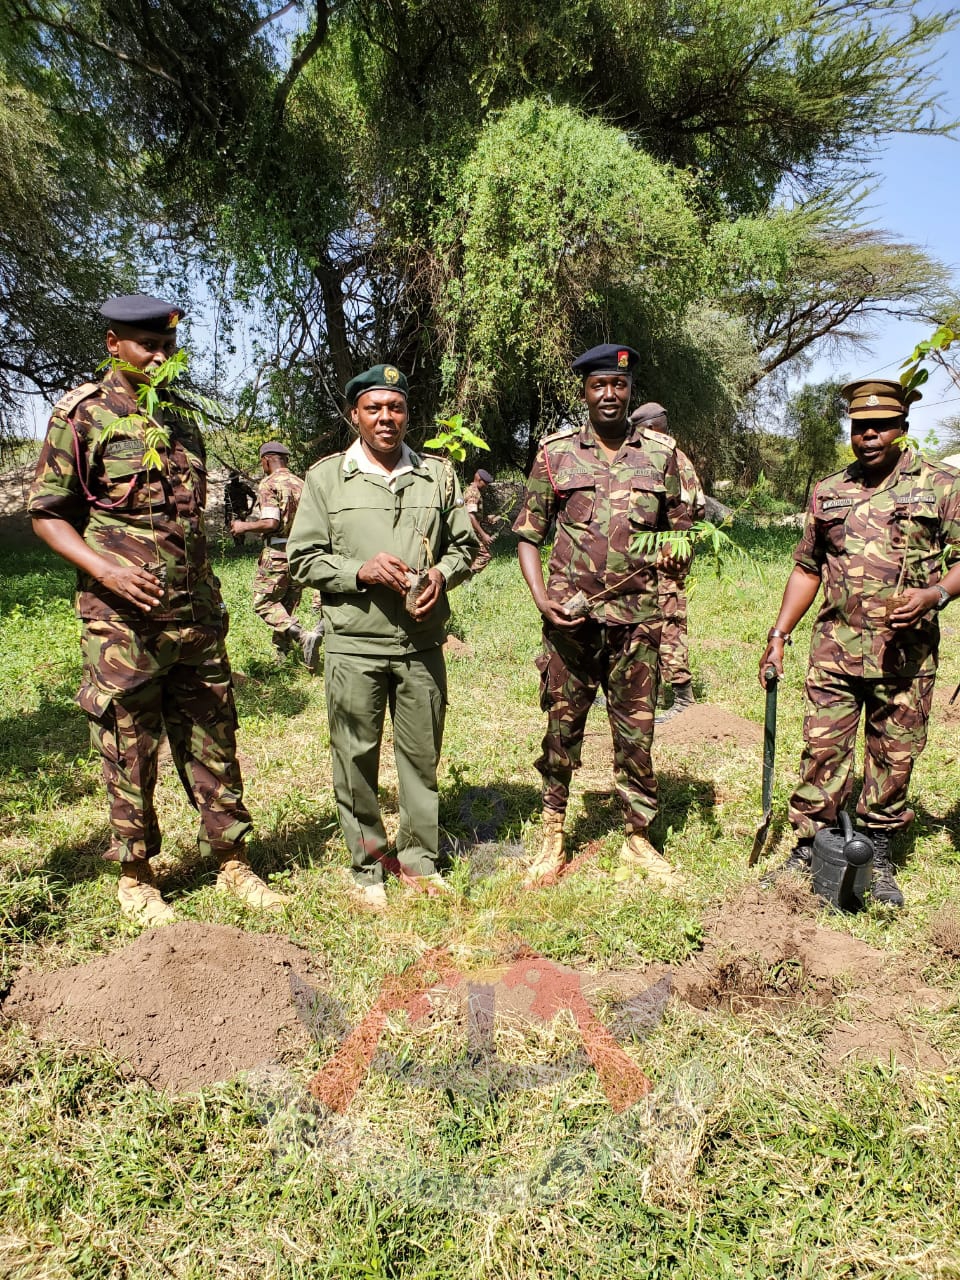 KDF TROOPS ENGAGE IN A TREE PLANTING EXERCISE